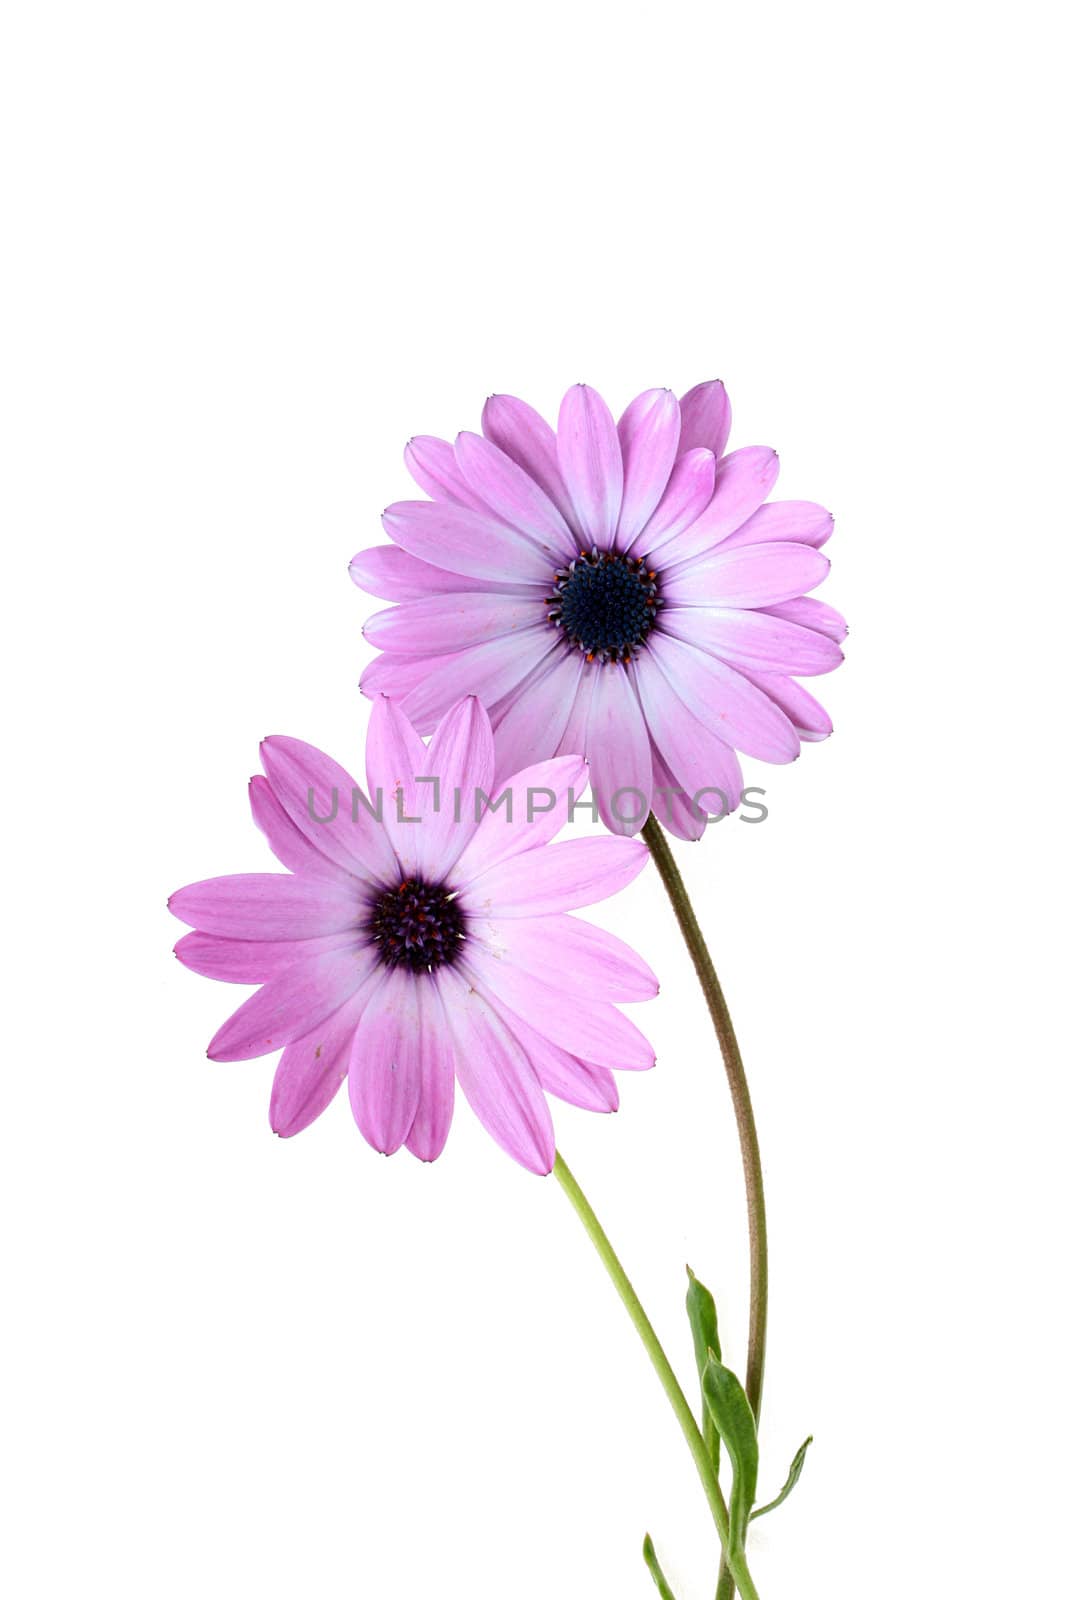 Decorative camomile with pink petals on a white background.